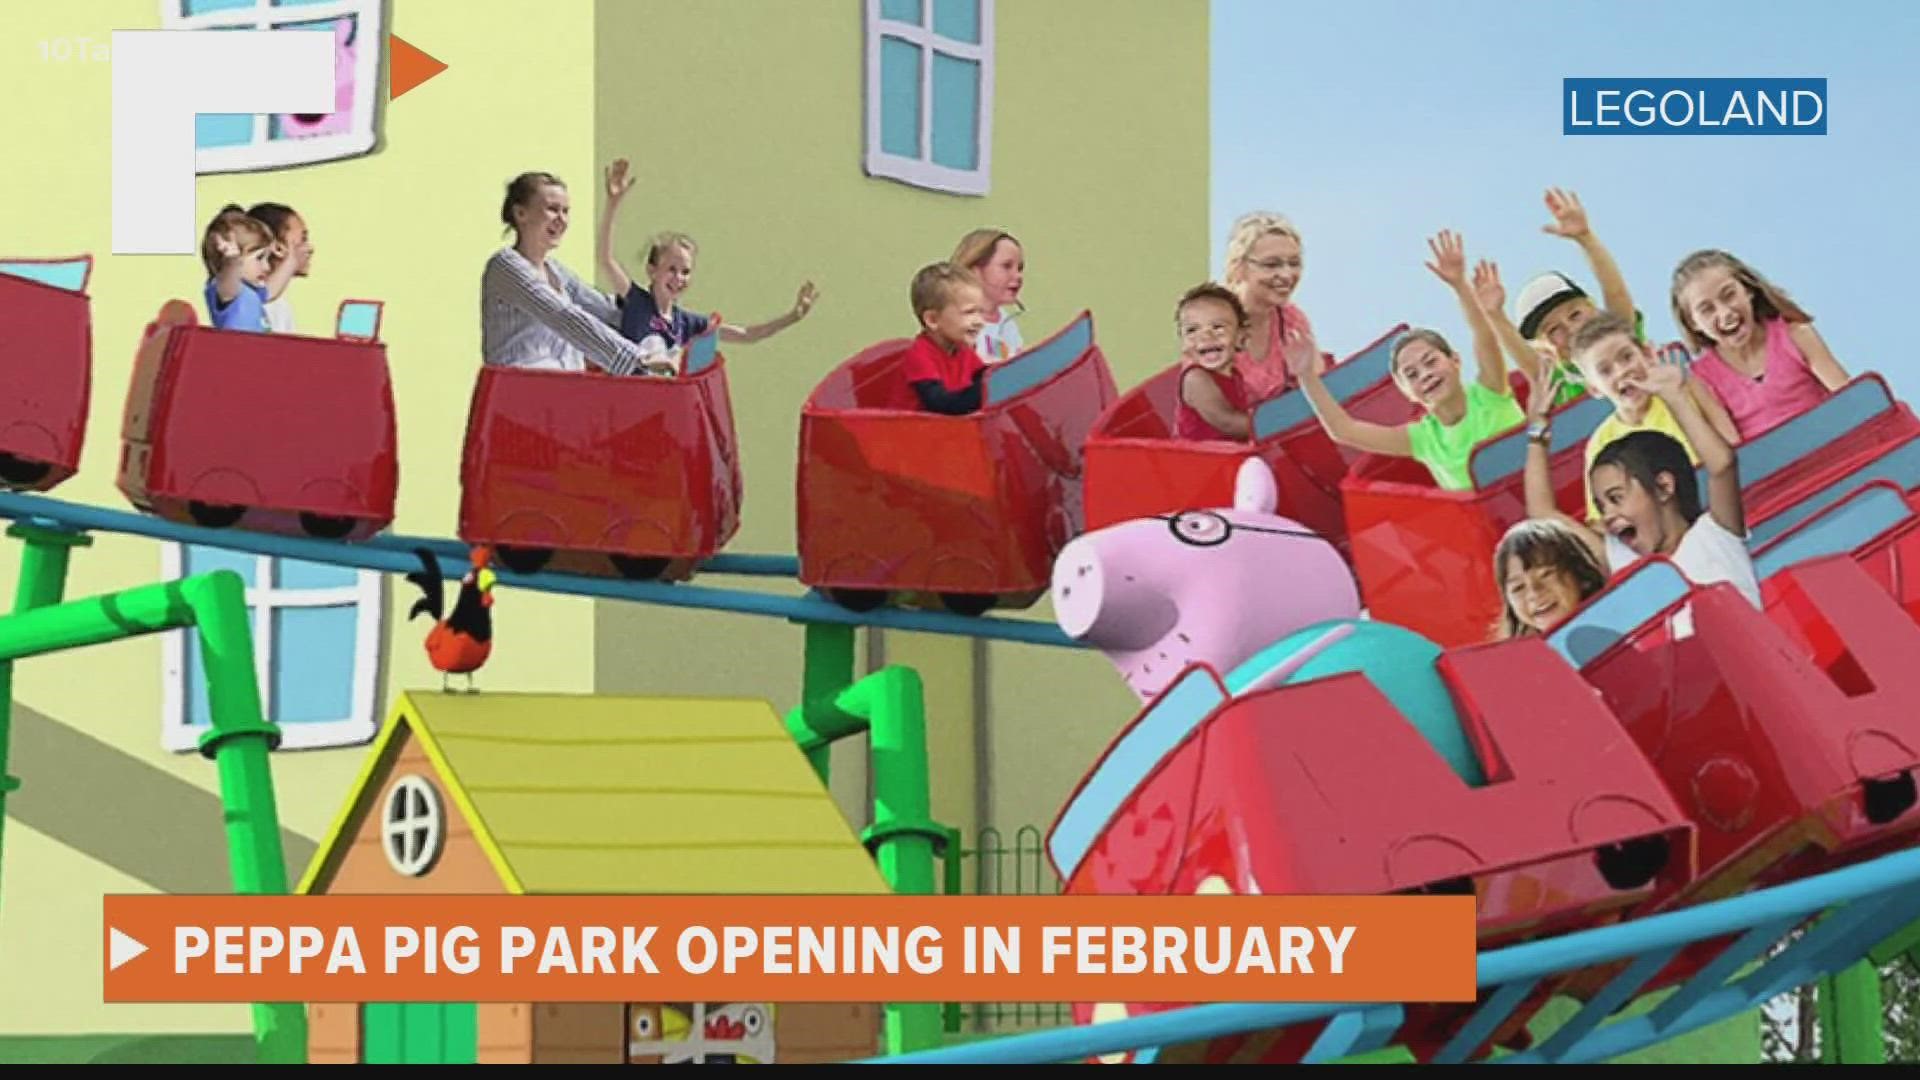 Peppa Pig' theme park opening in Florida